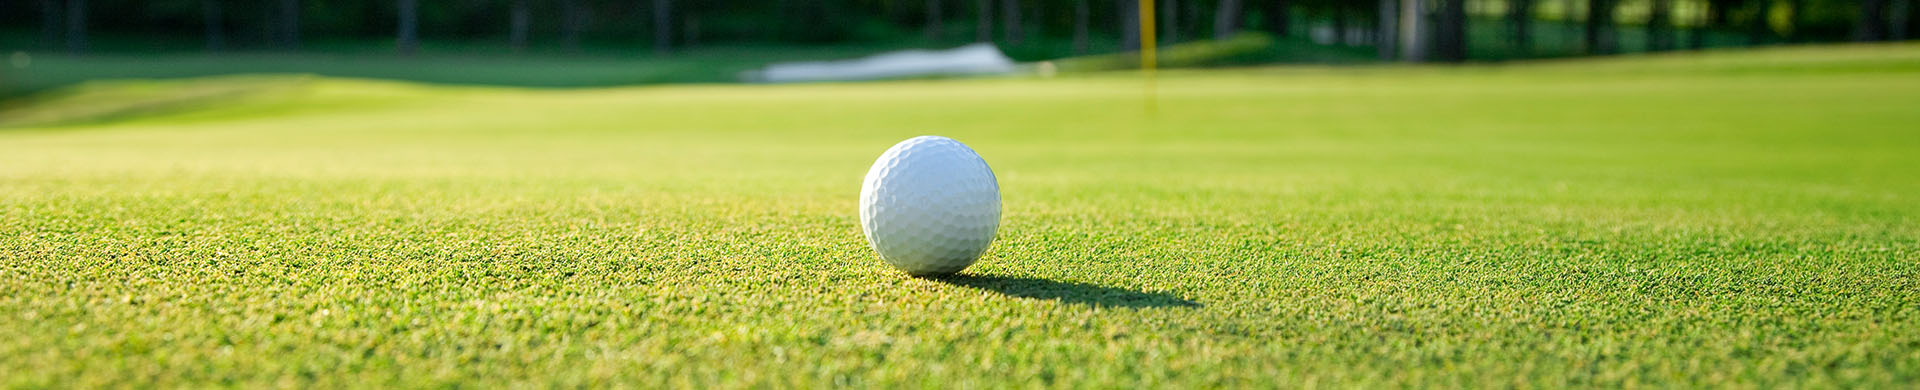 Close up on a golf ball on a putting green 